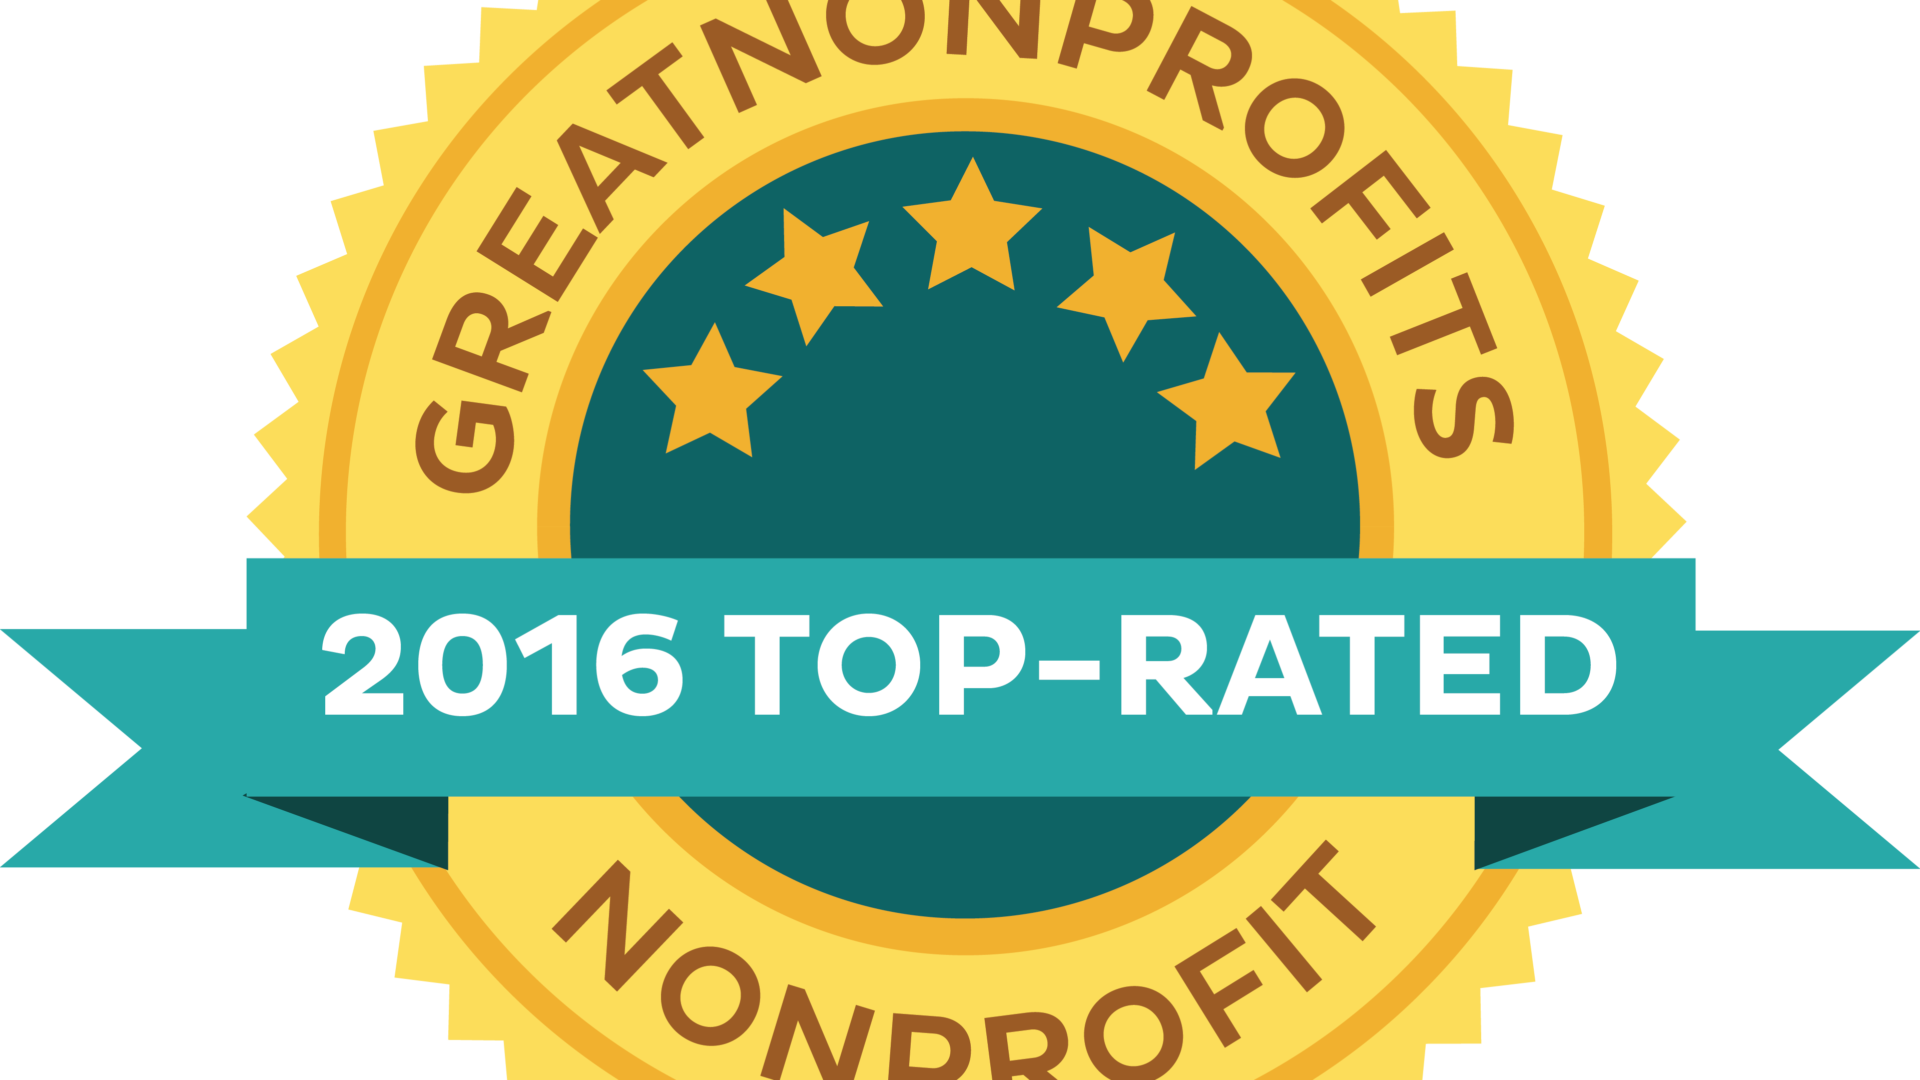 2016 Top-Rated Non-Profit